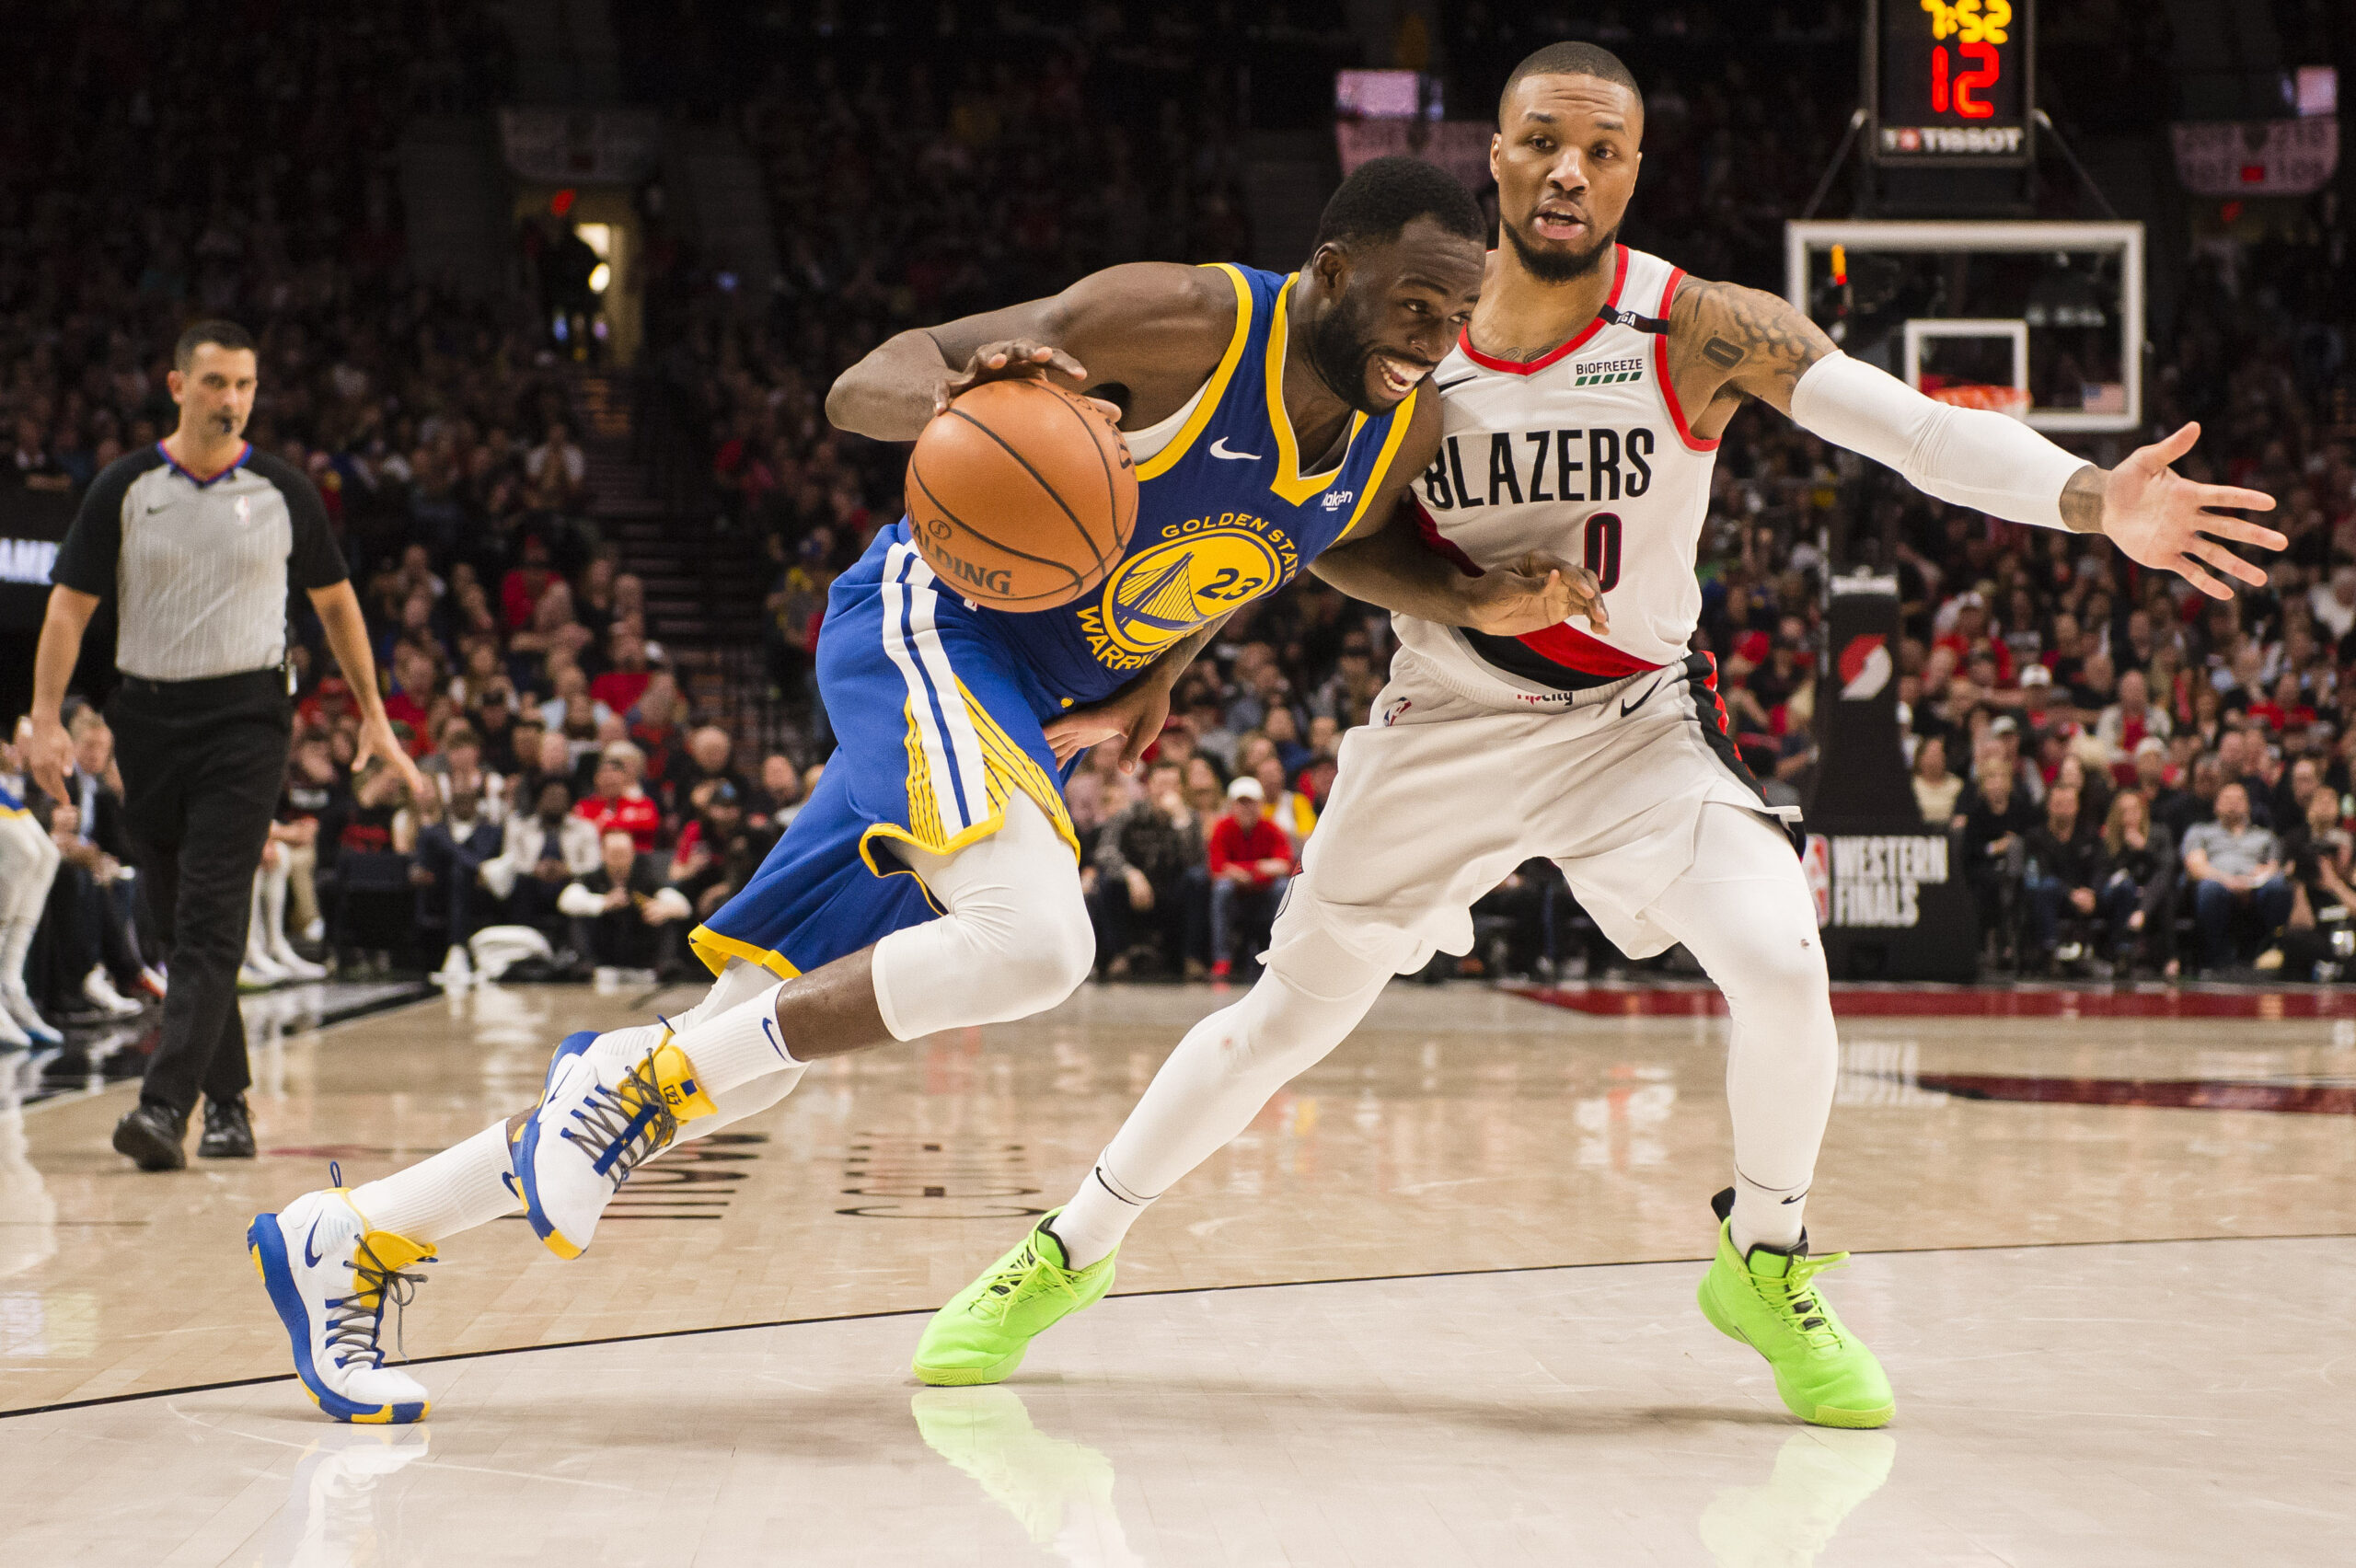 Injury Report: Warriors’ Draymond Green (knee) questionable vs. Trail Blazers on Tuesday